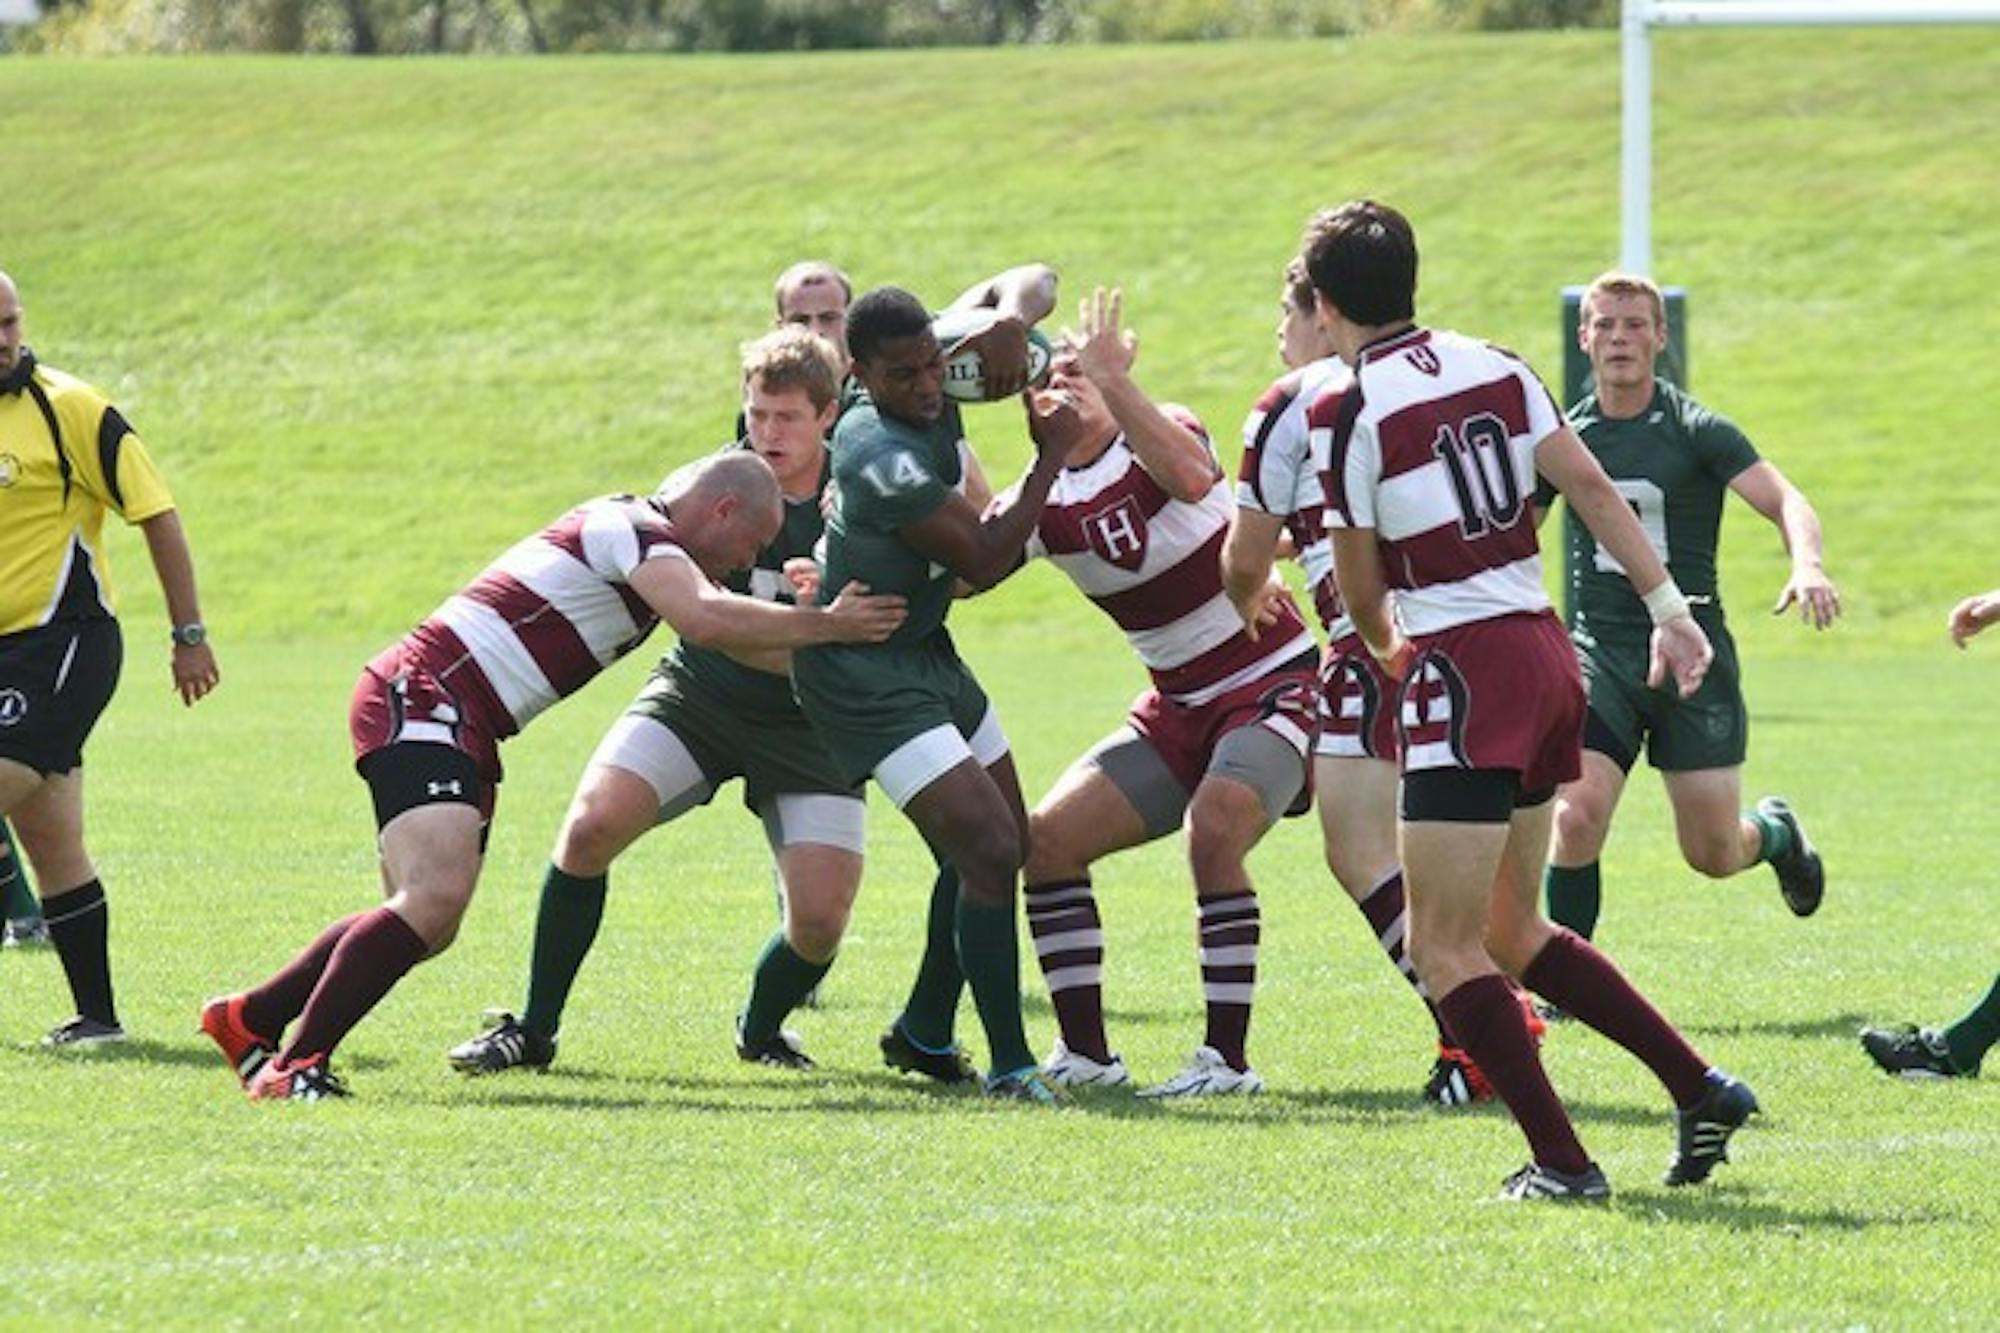 09.26.12.sports.rugby